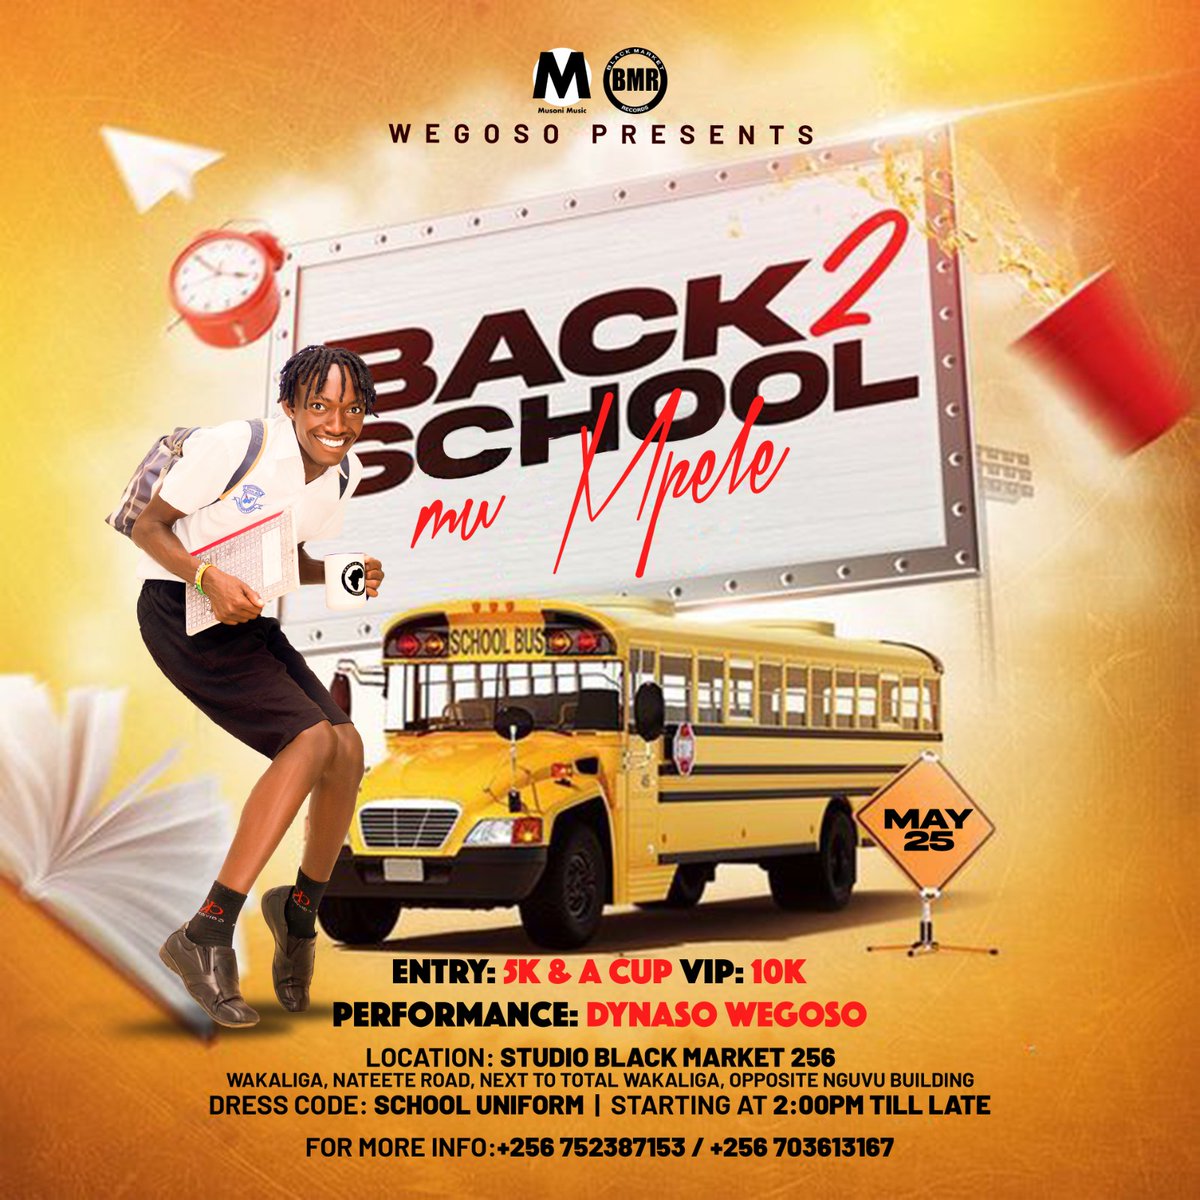 Partiers in Kampala, don’t miss Dynaso Wegoso live at 'Back To School Mumpele' this Saturday, May 25, 2024, at Studio Black Market256. Enjoy performances and activities for just Shs5K. Stream his hit #Empele on YouTube now! youtu.be/-UR812HtGRY?si… #KeremBürsin #LevisthxBUS